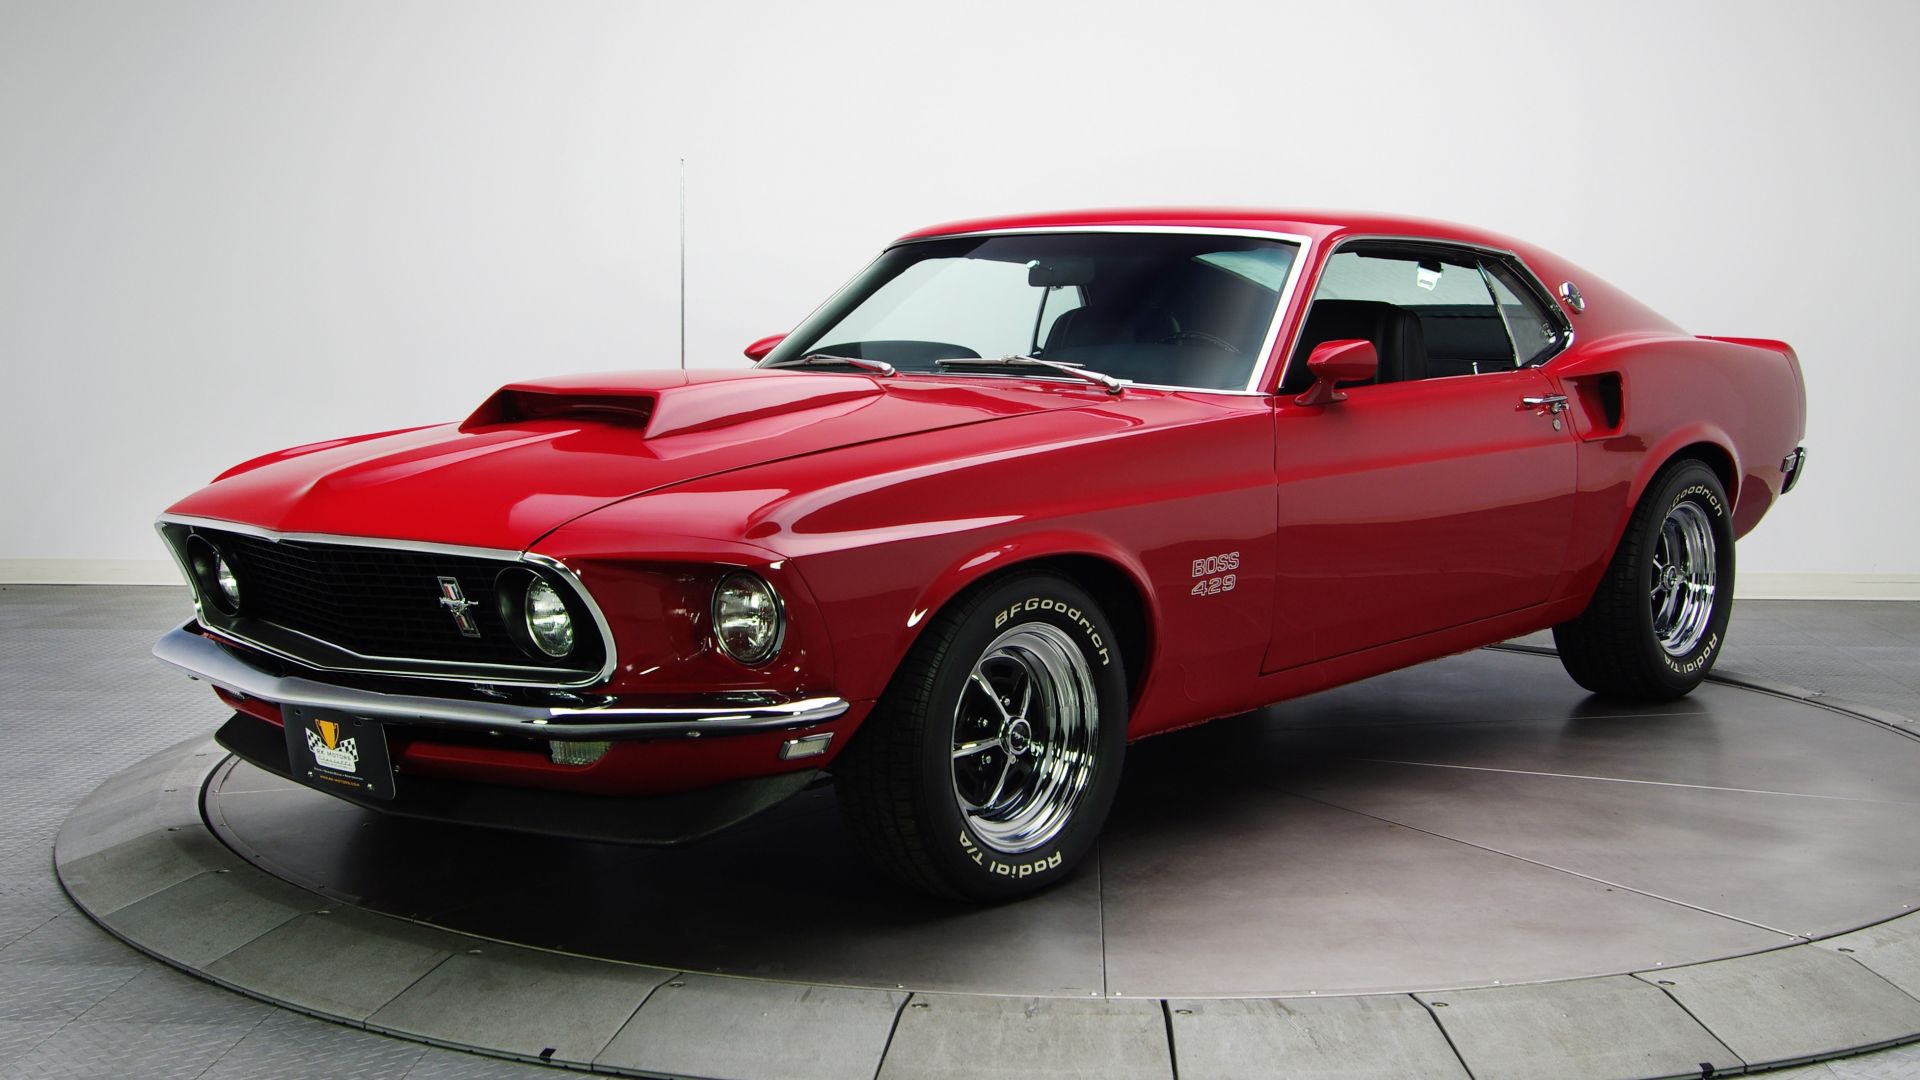 Wallpaper Ford Mustang Boss, red muscle car